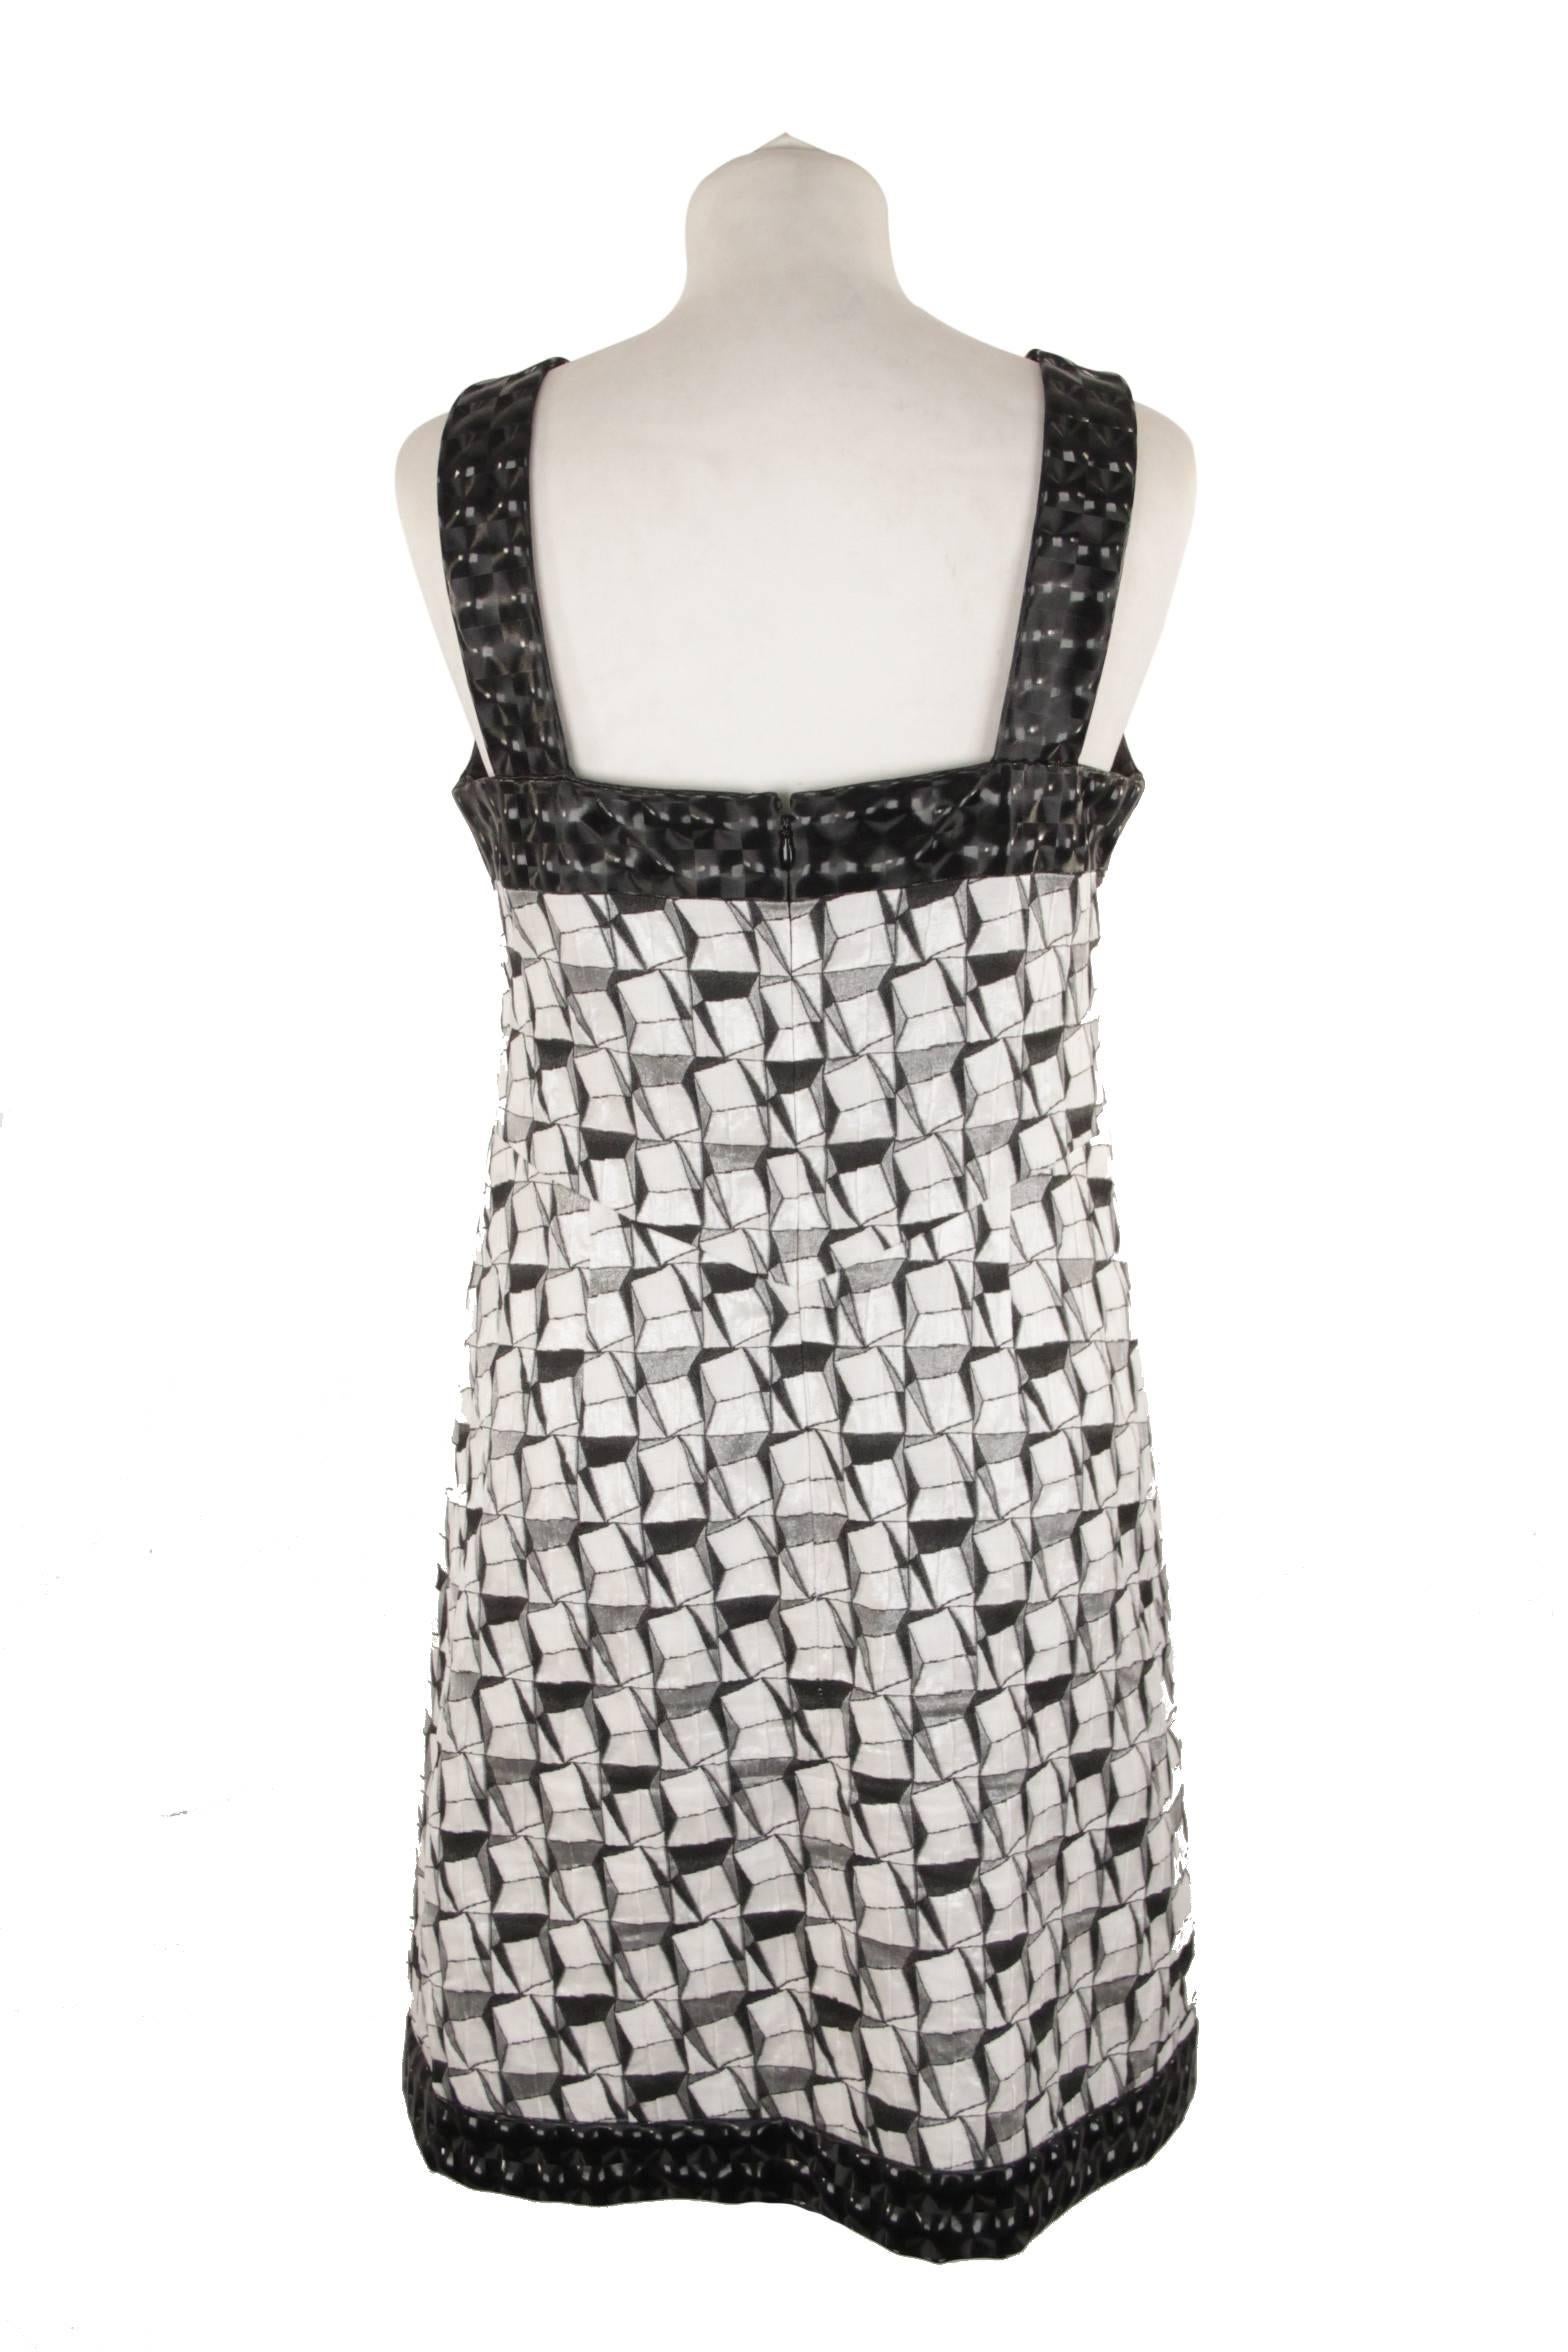 CHANEL Black & White GEOMETRIC Cotton Blend SLEEVELESS DRESS Size 36 In Good Condition In Rome, Rome